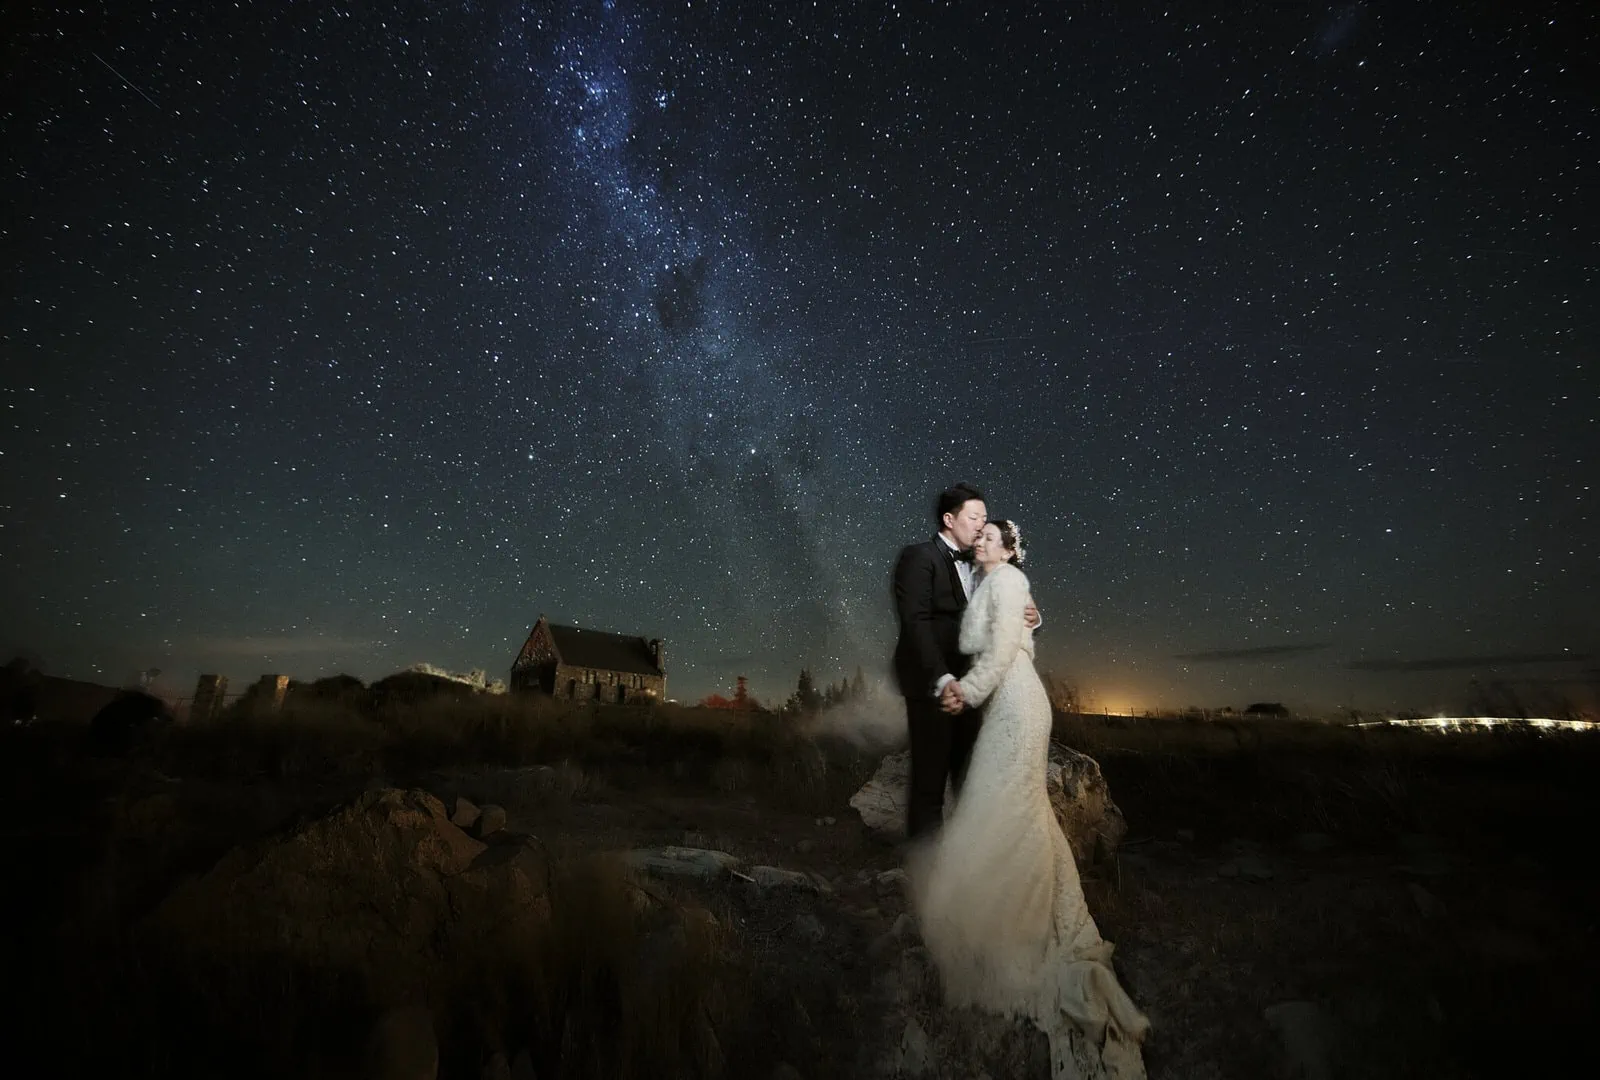 Queenstown New Zealand Elopement Wedding Photographer - A mesmerizing Starry Night Shoot featuring a bride and groom standing under the milky way, beautifully captured for our portfolio.